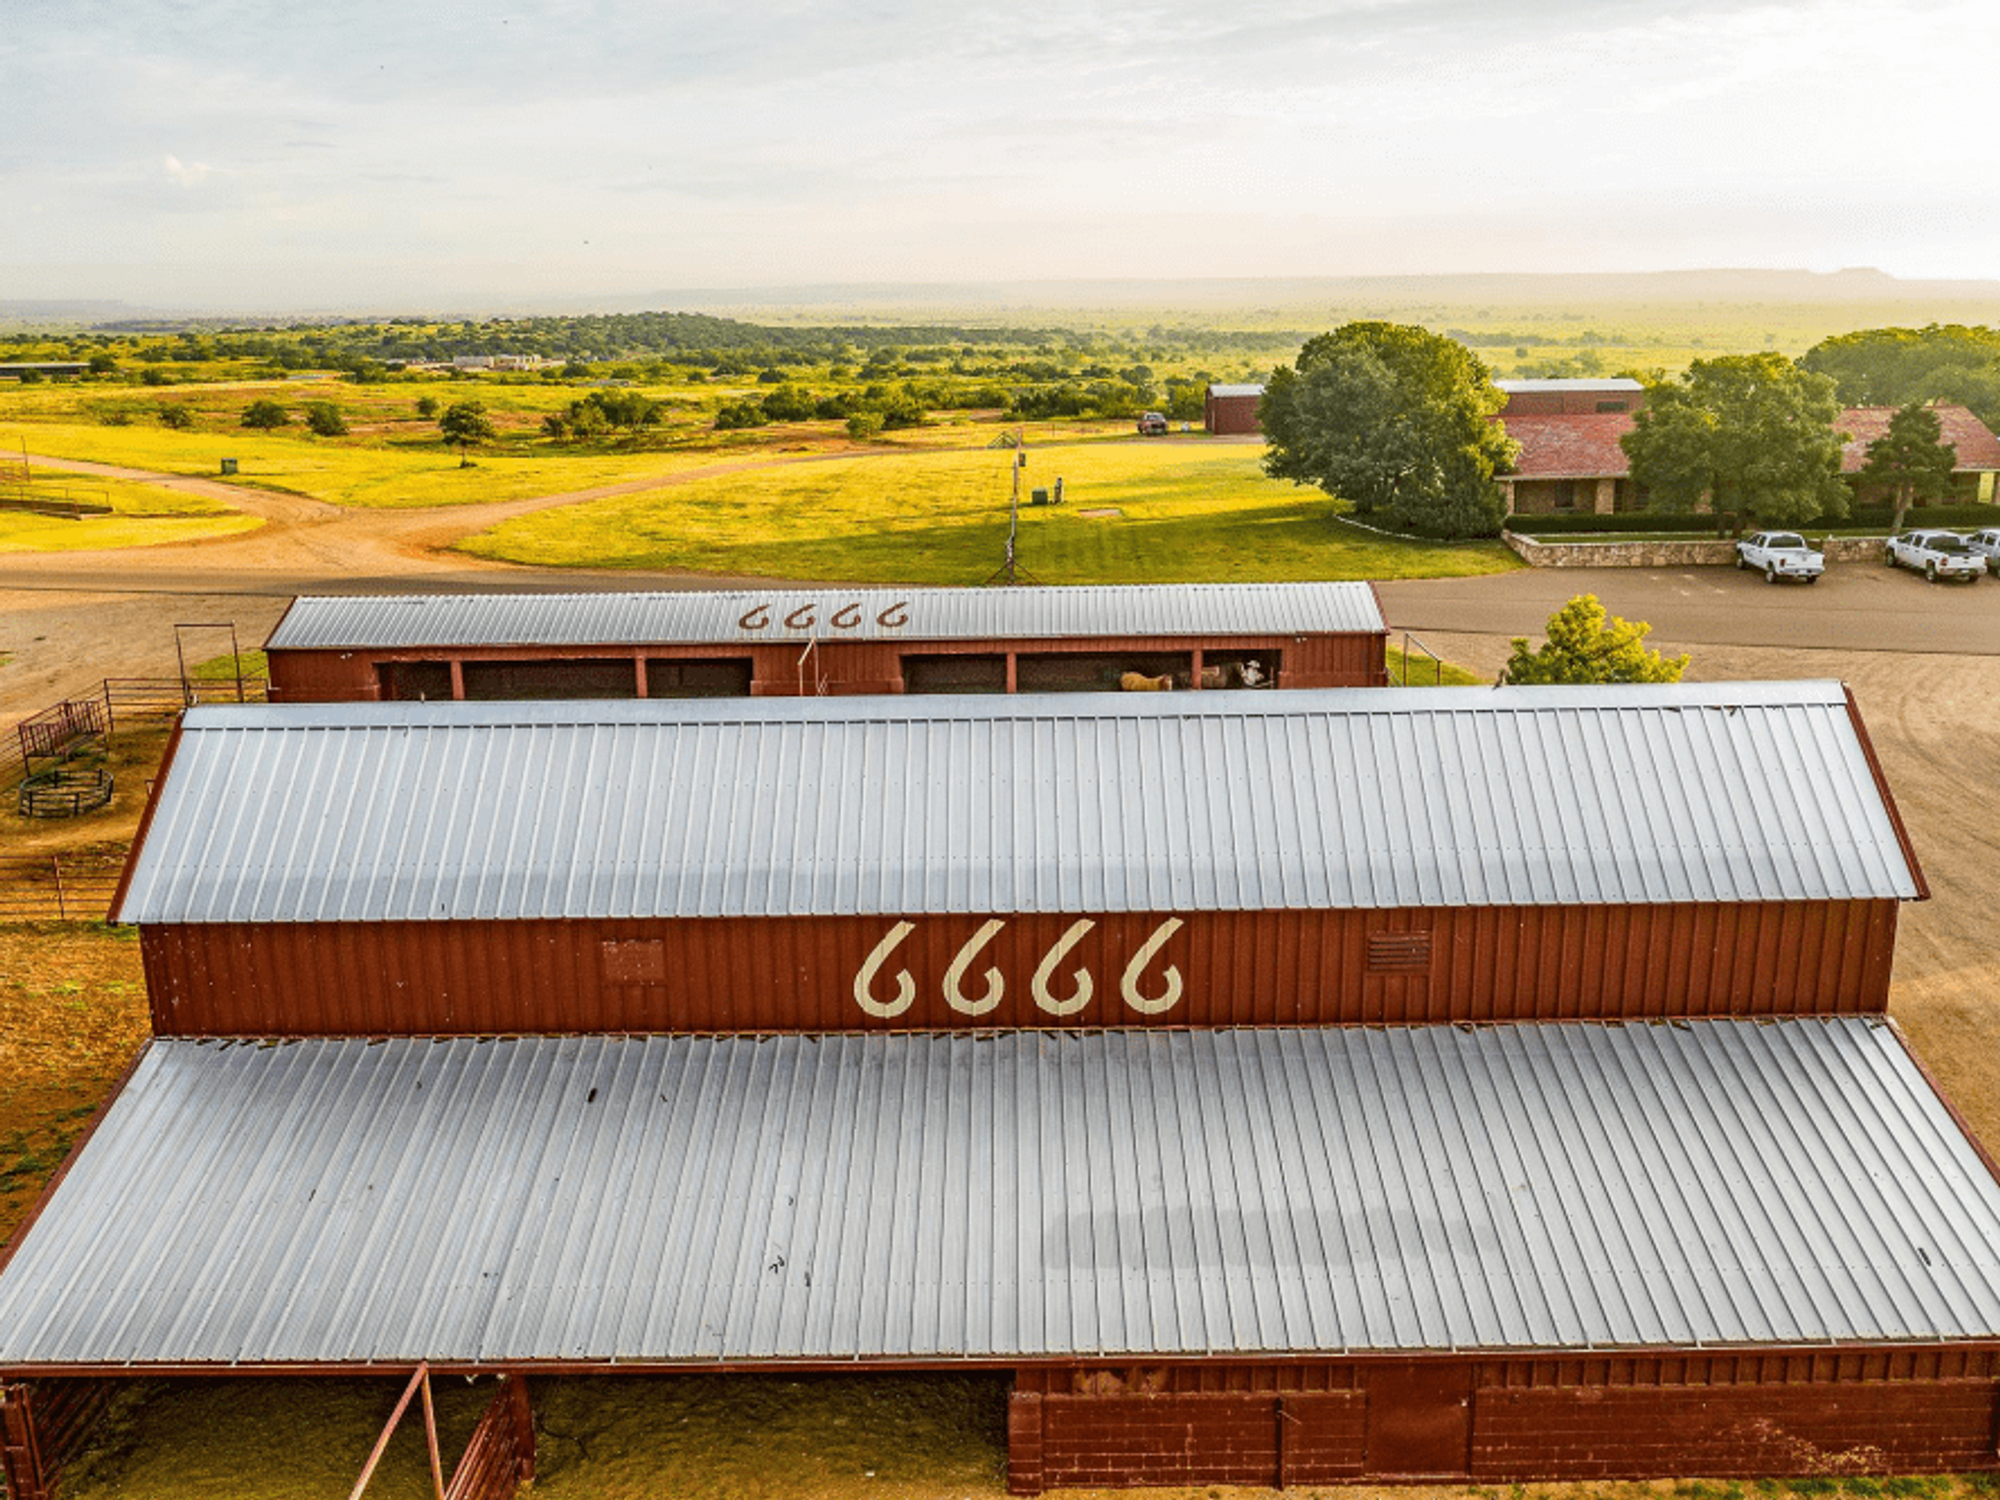 The property includes a 48,750-square-foot horse arena and several barns and stables.